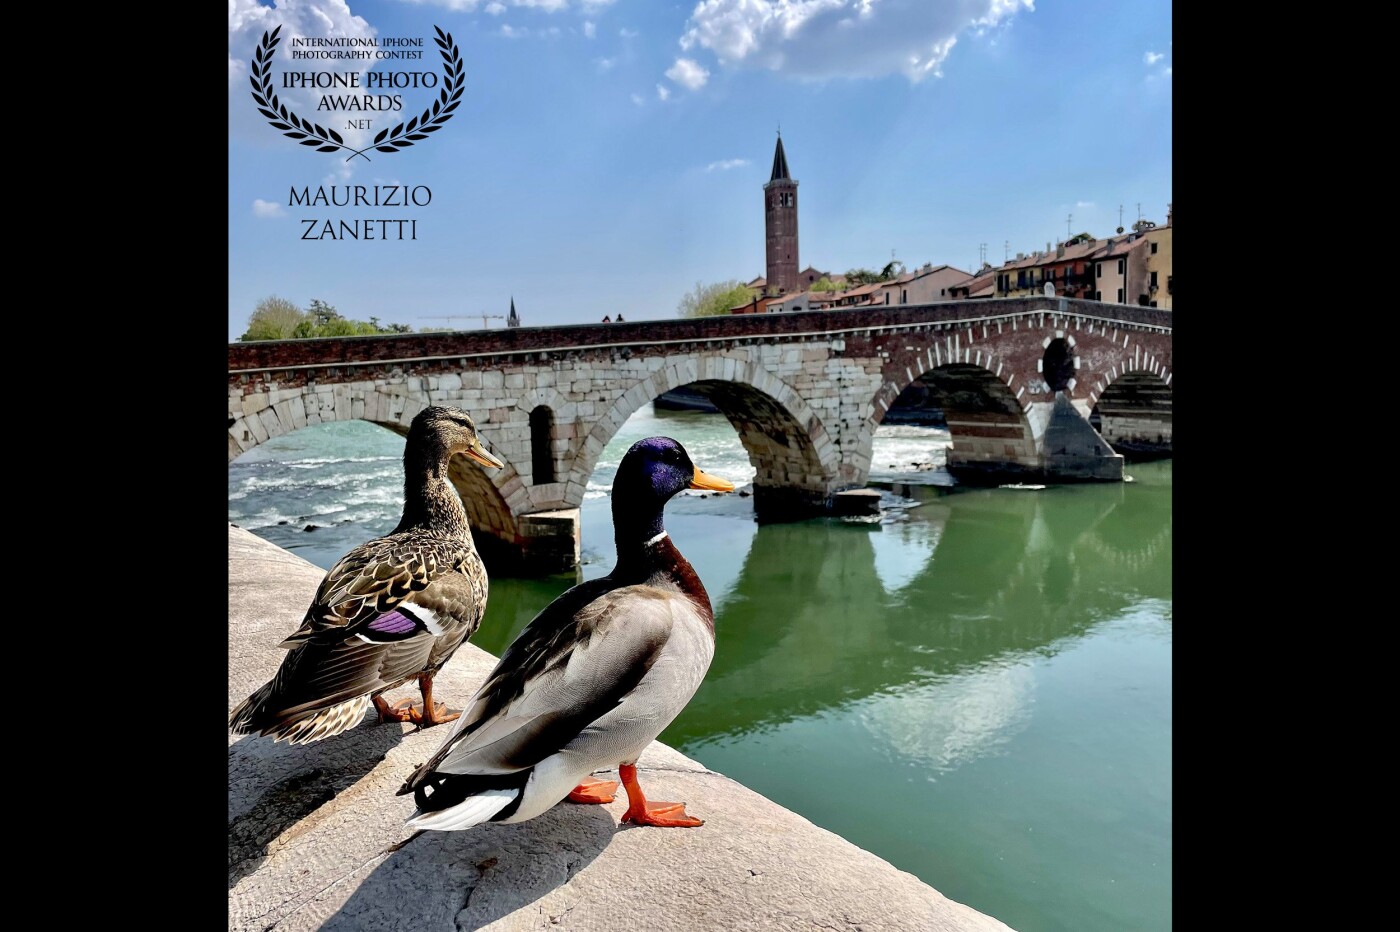 They are the most photographed pair (of ducks) in the city. They live peacefully under the ancient Ponte Pietra. They allow themselves to tourists who hastily pass by, take a picture, leave. They are in no hurry: that bridge is always their home. The photo was taken with iPhone 12 Pro.